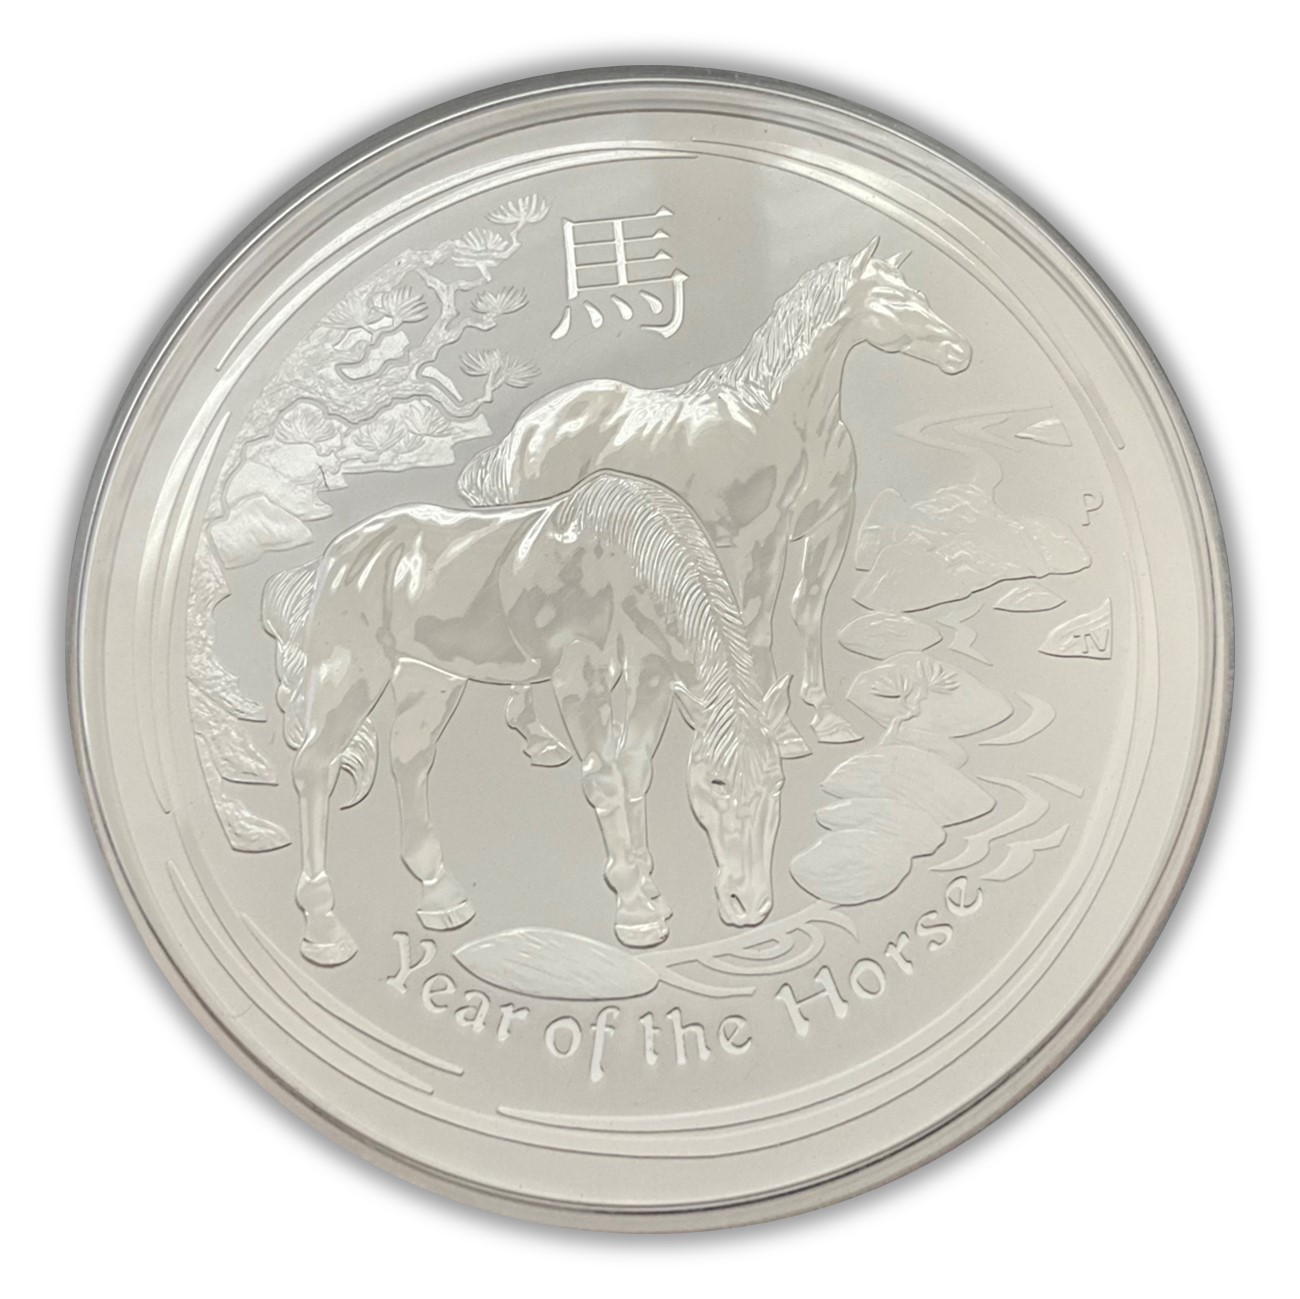 2014 Perth Mint Silver Lunar Year of the Horse 10 oz Silver Coin